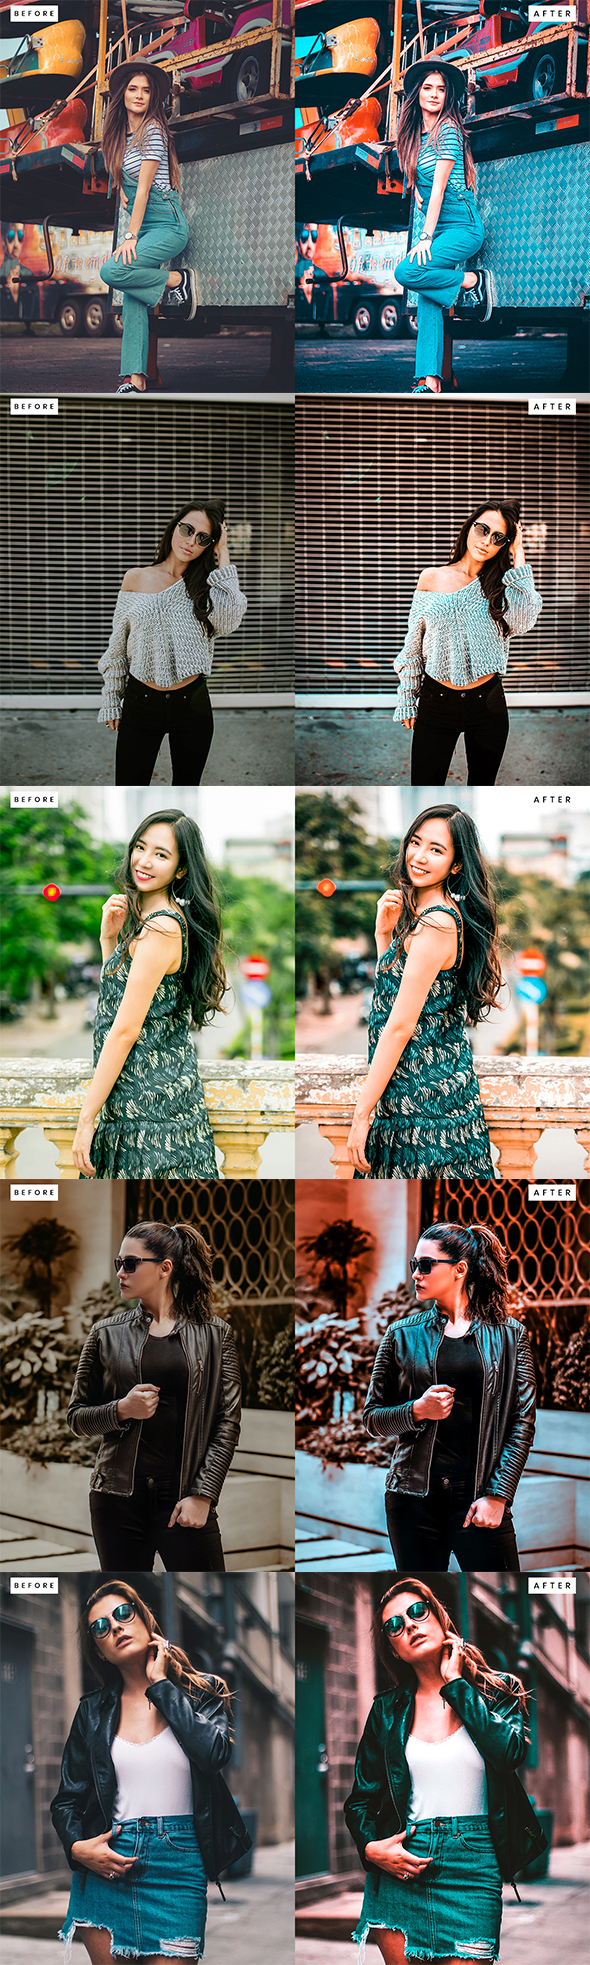 [DOWNLOAD]Fashion Photoshop Actions